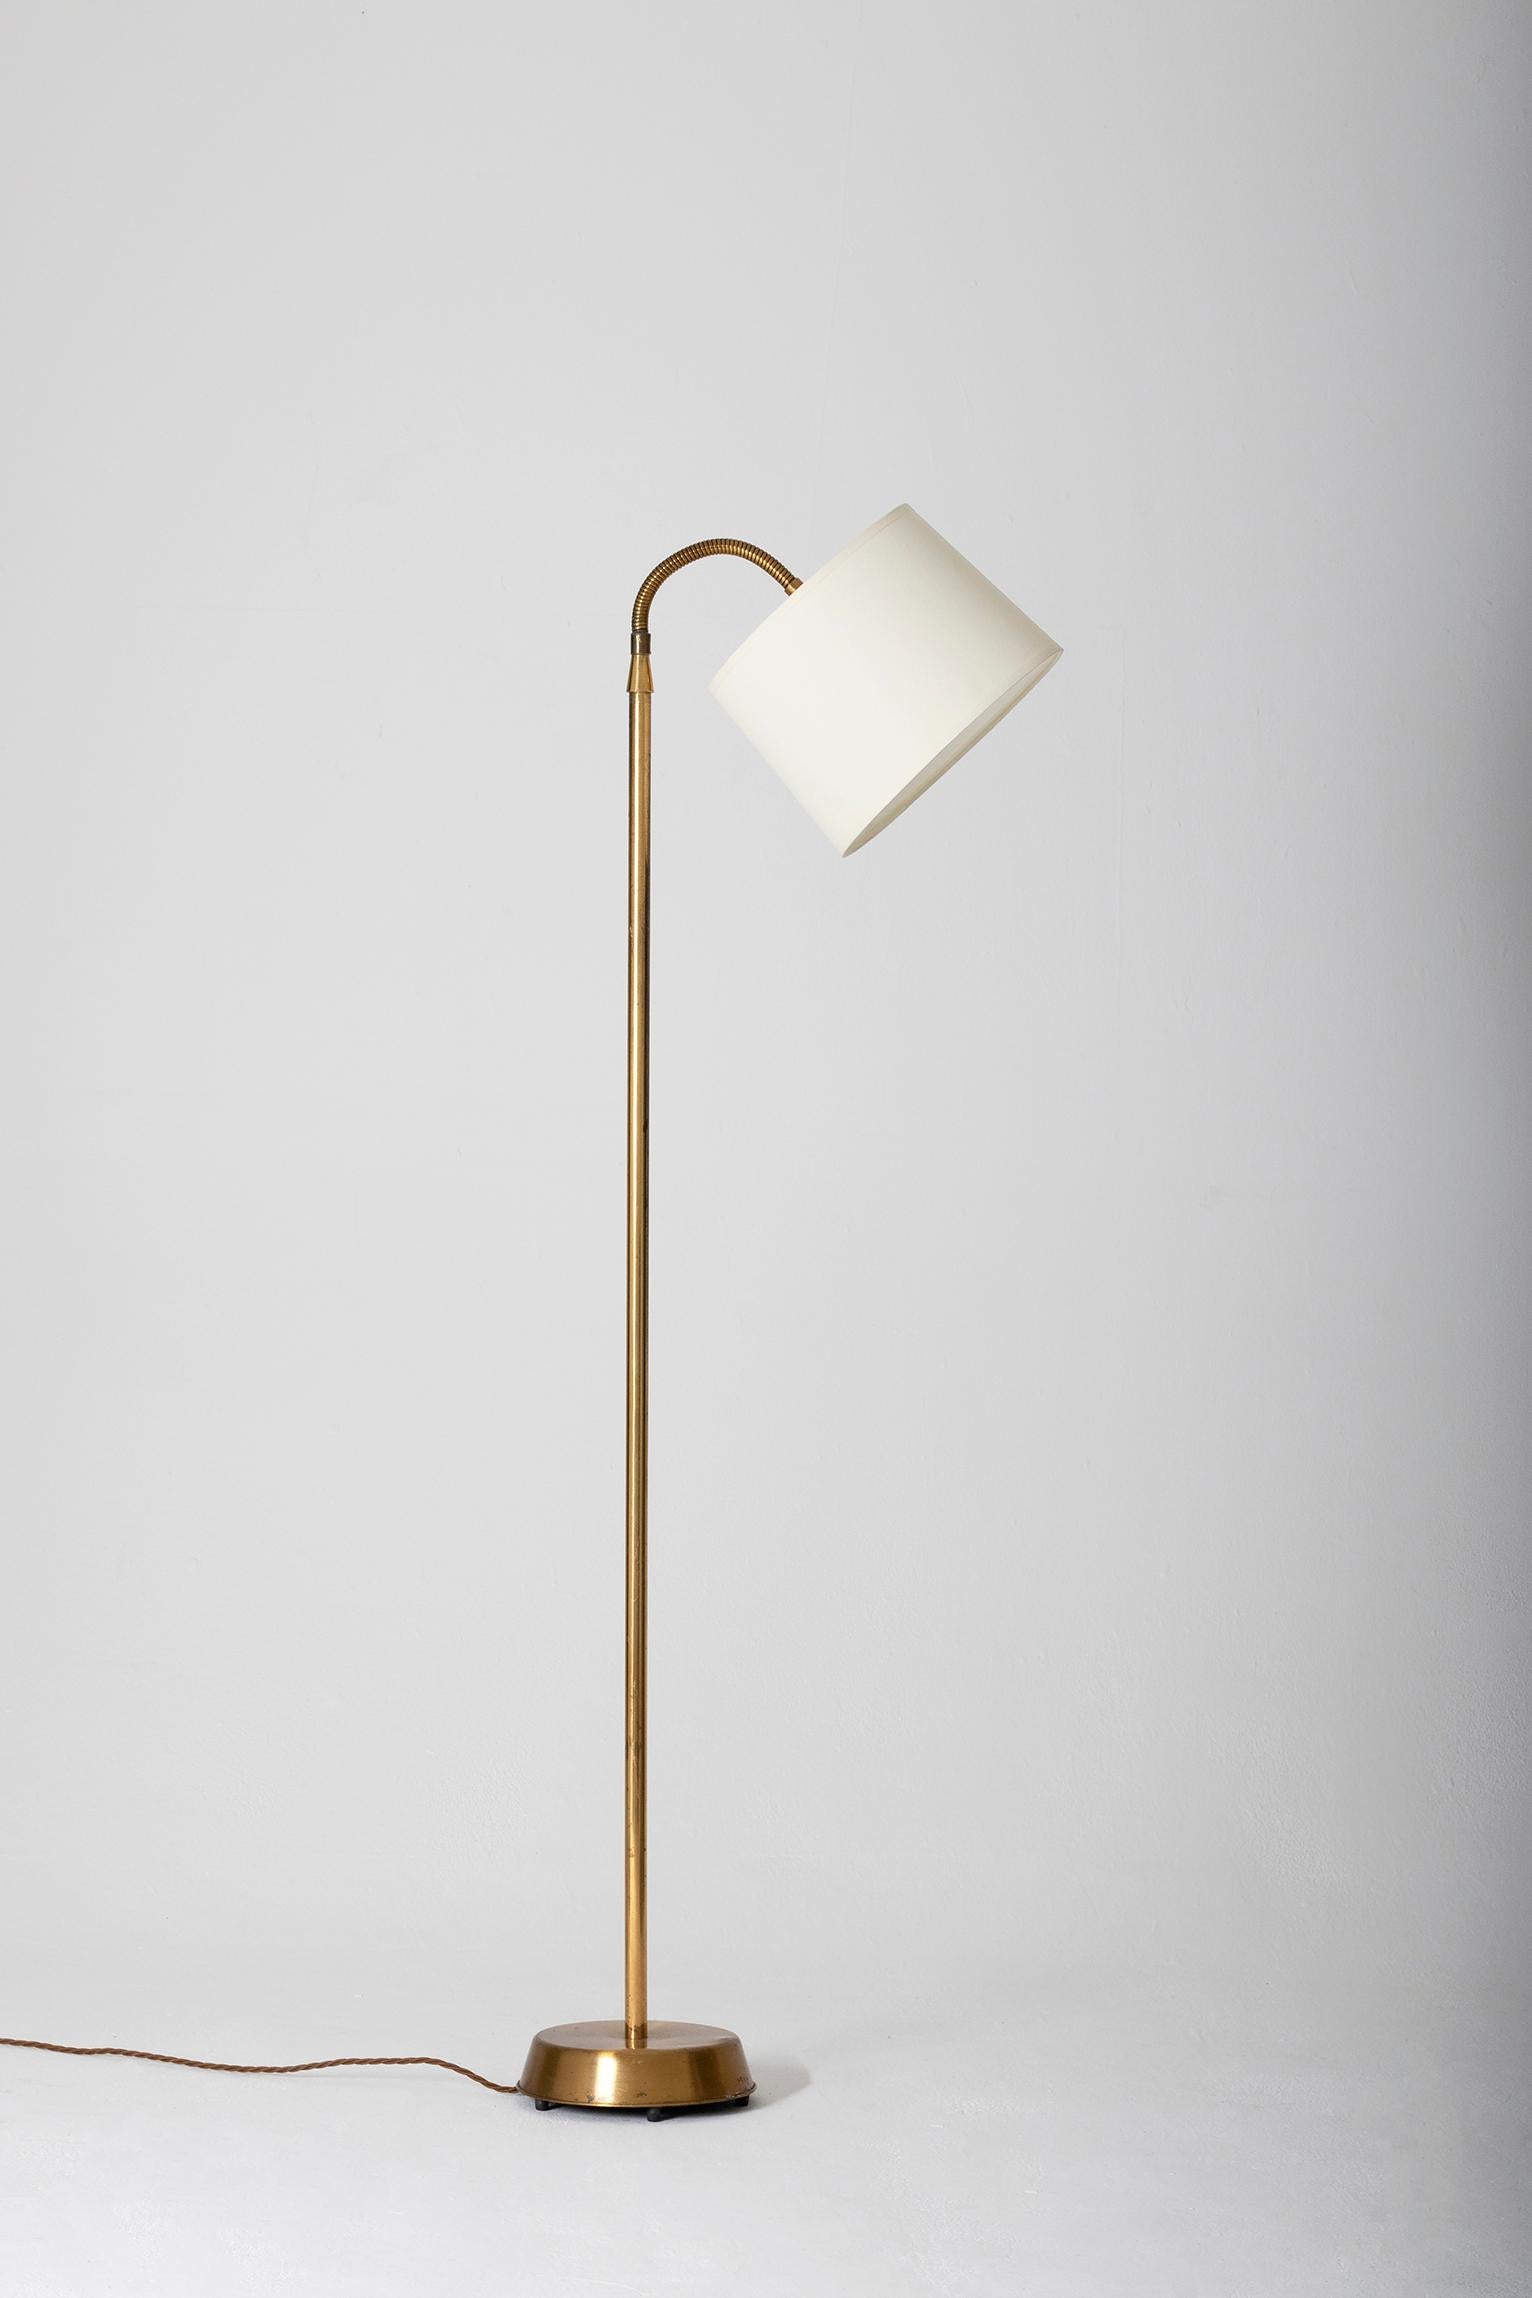 A brass reading floor lamp, with an orientable brass gooseneck and bespoke off-white shade.
Sweden, circa 1950-1975.